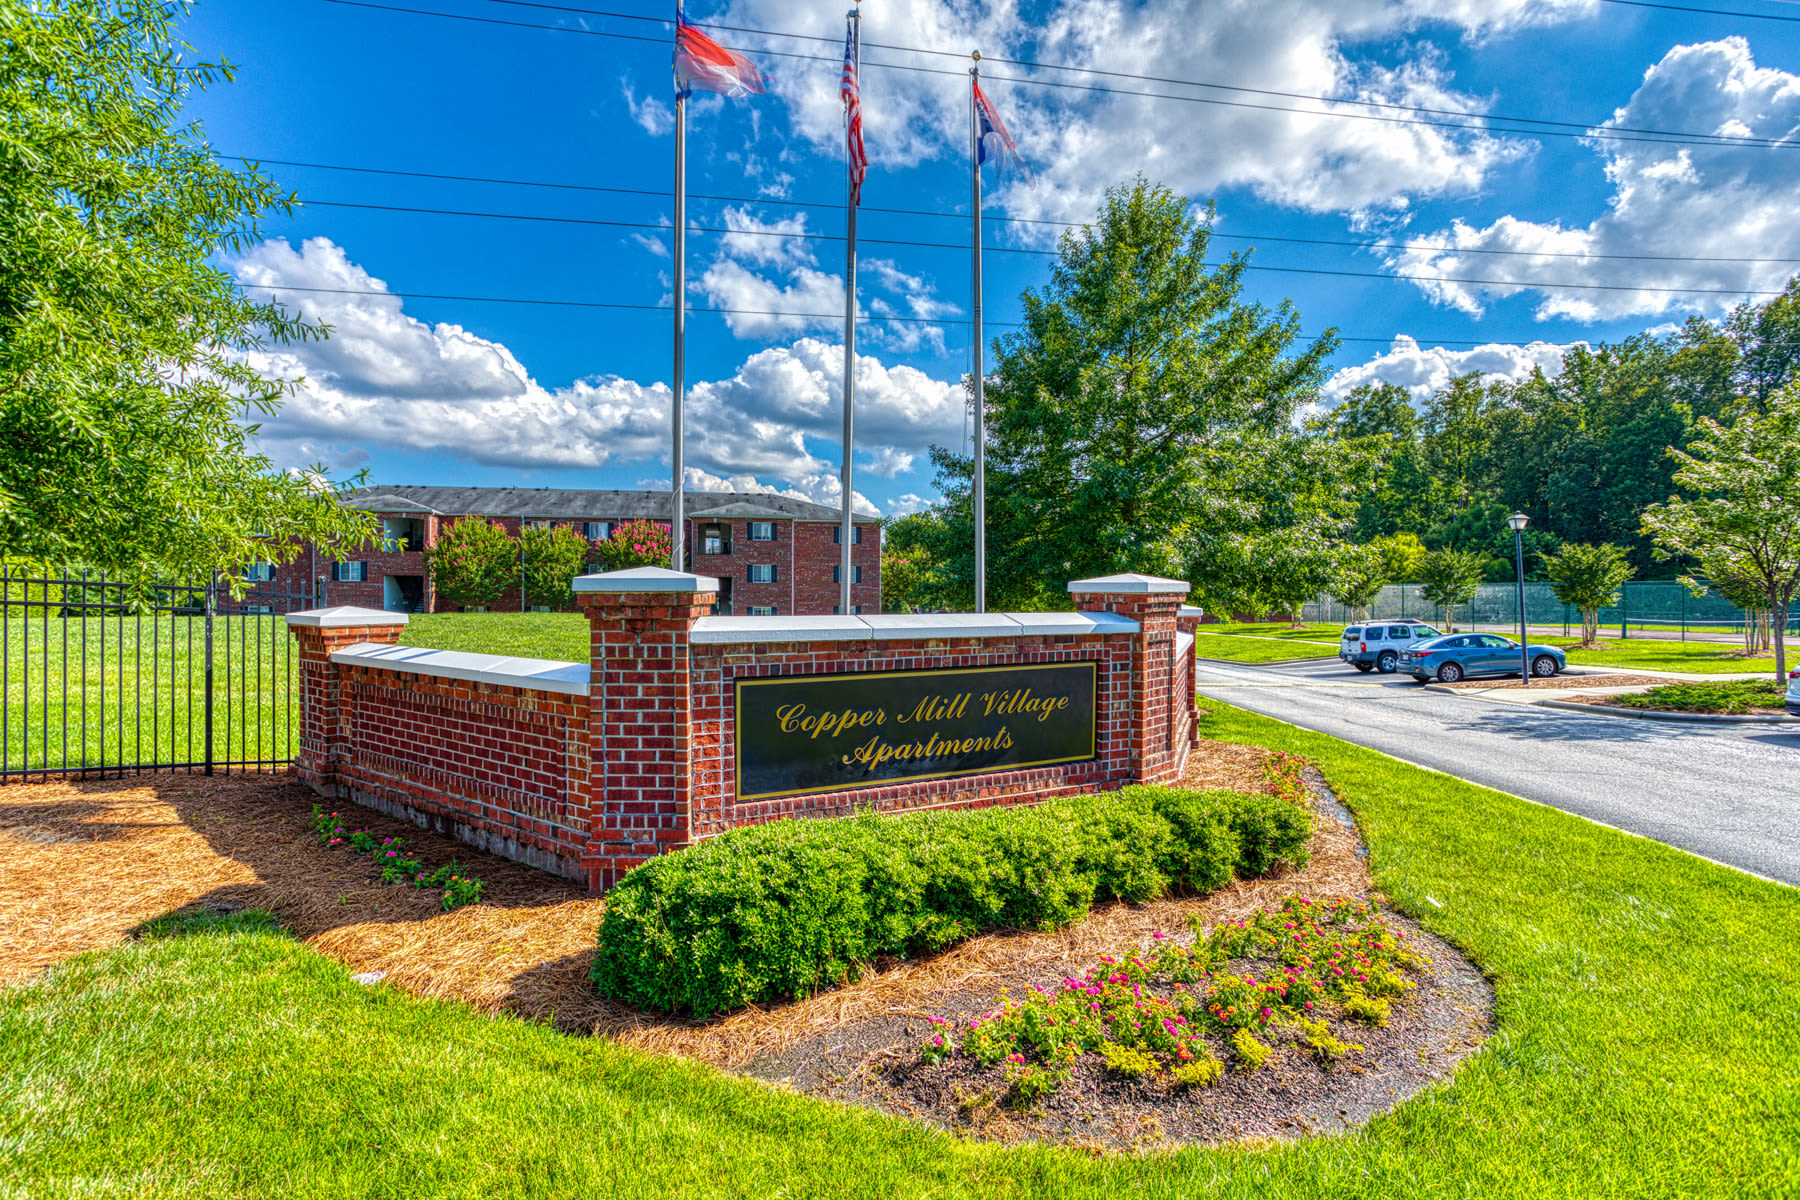 Front sign near Copper Mill Village in High Point, North Carolina